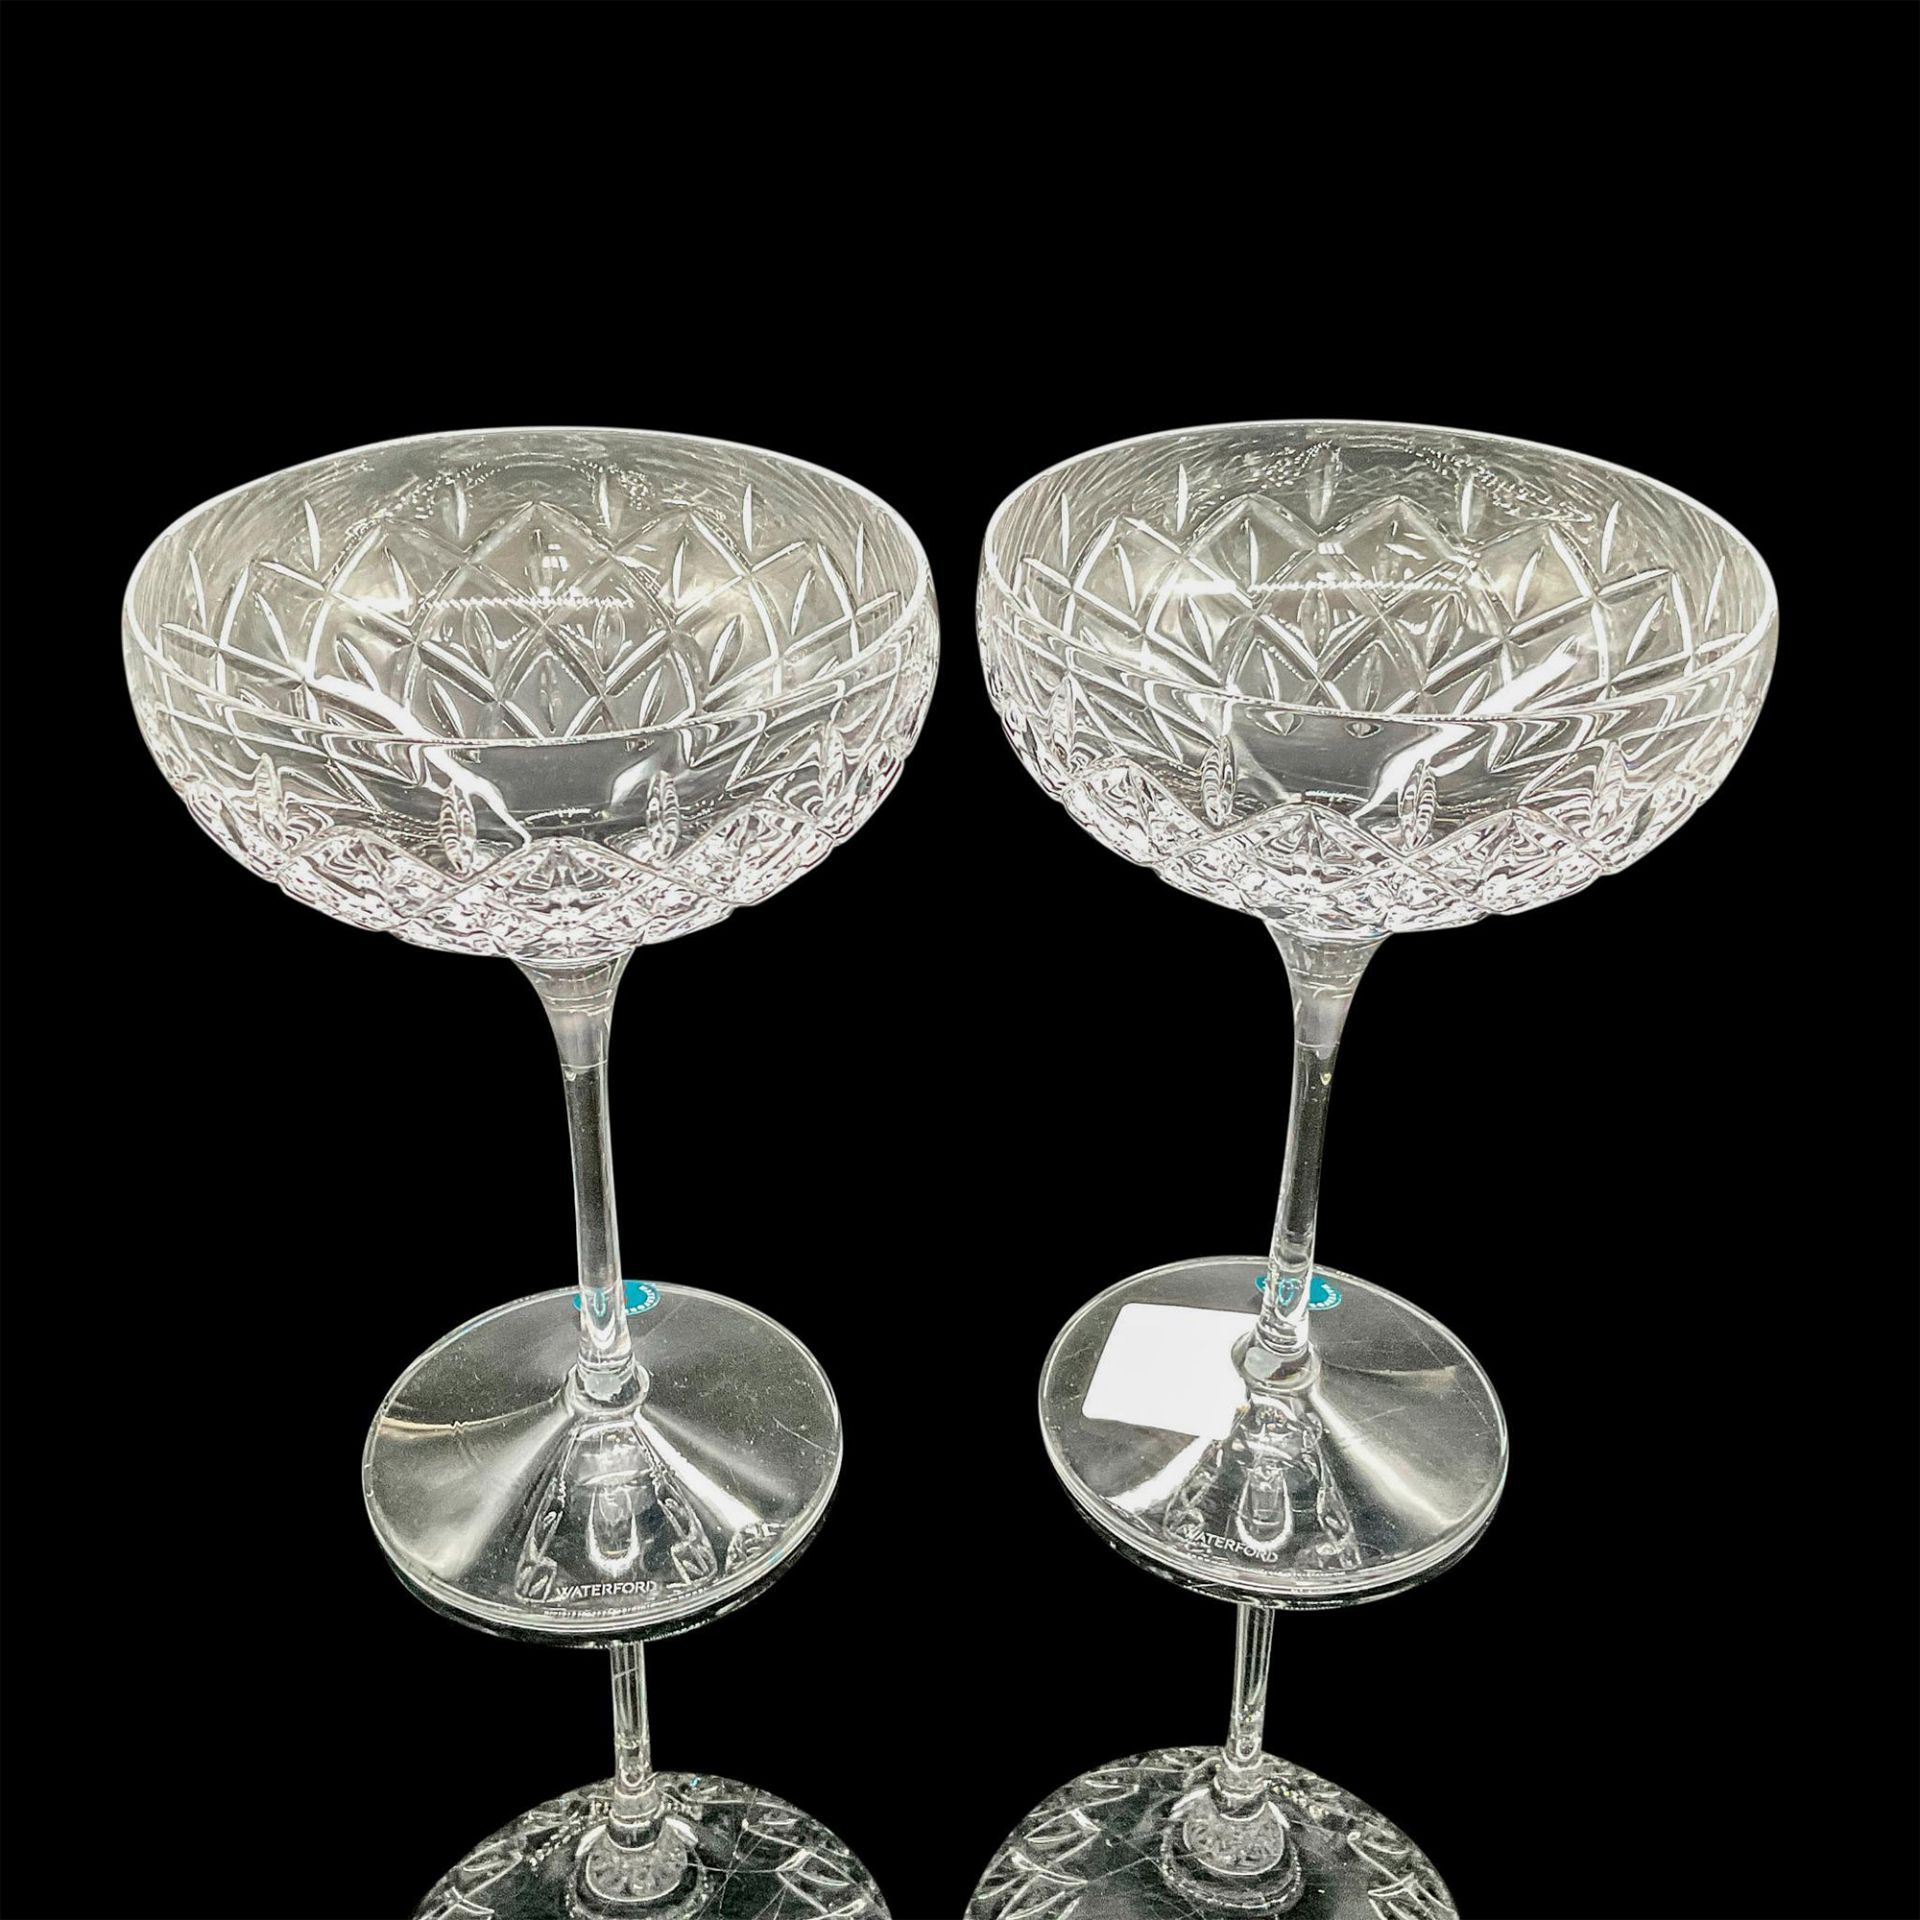 Waterford Crystal Cocktail Glasses, Astor - Image 2 of 4